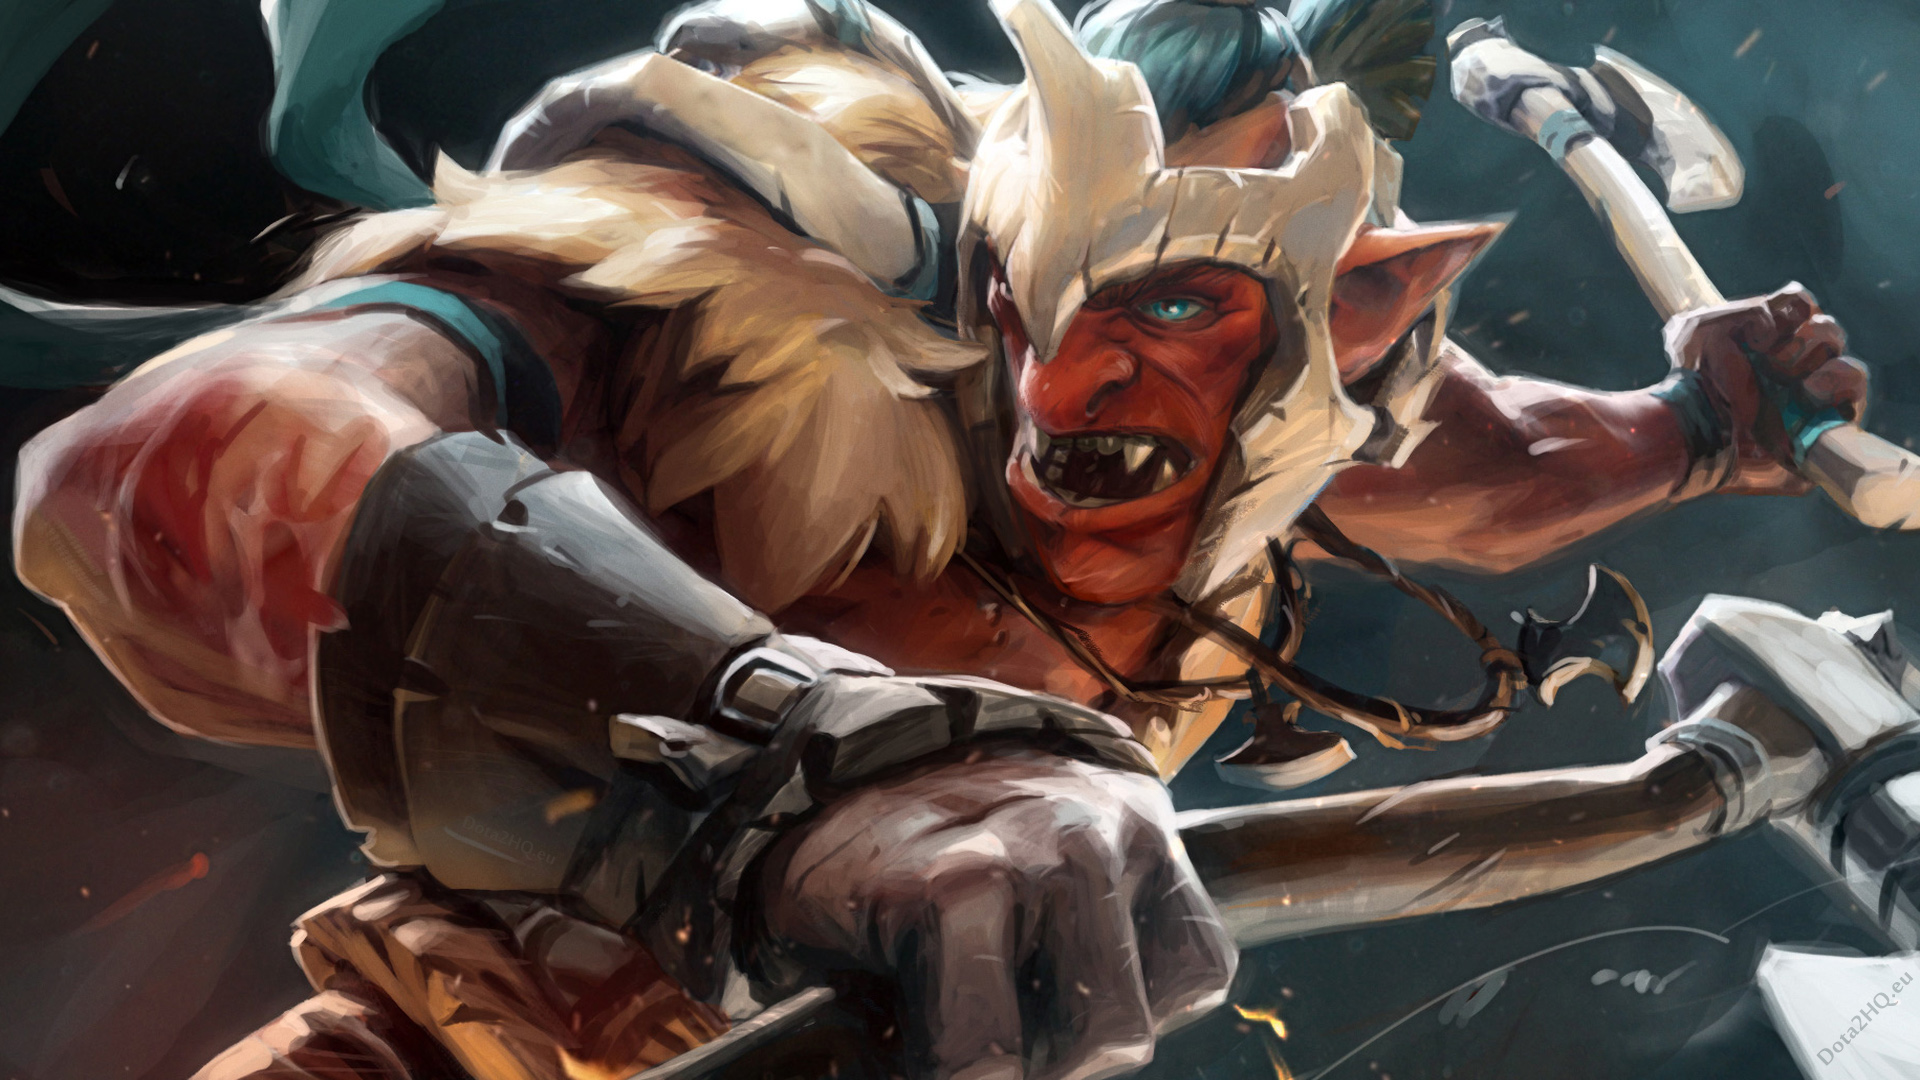 Balance Patch 706b Brings Just A Dash Of Change To Dota 2